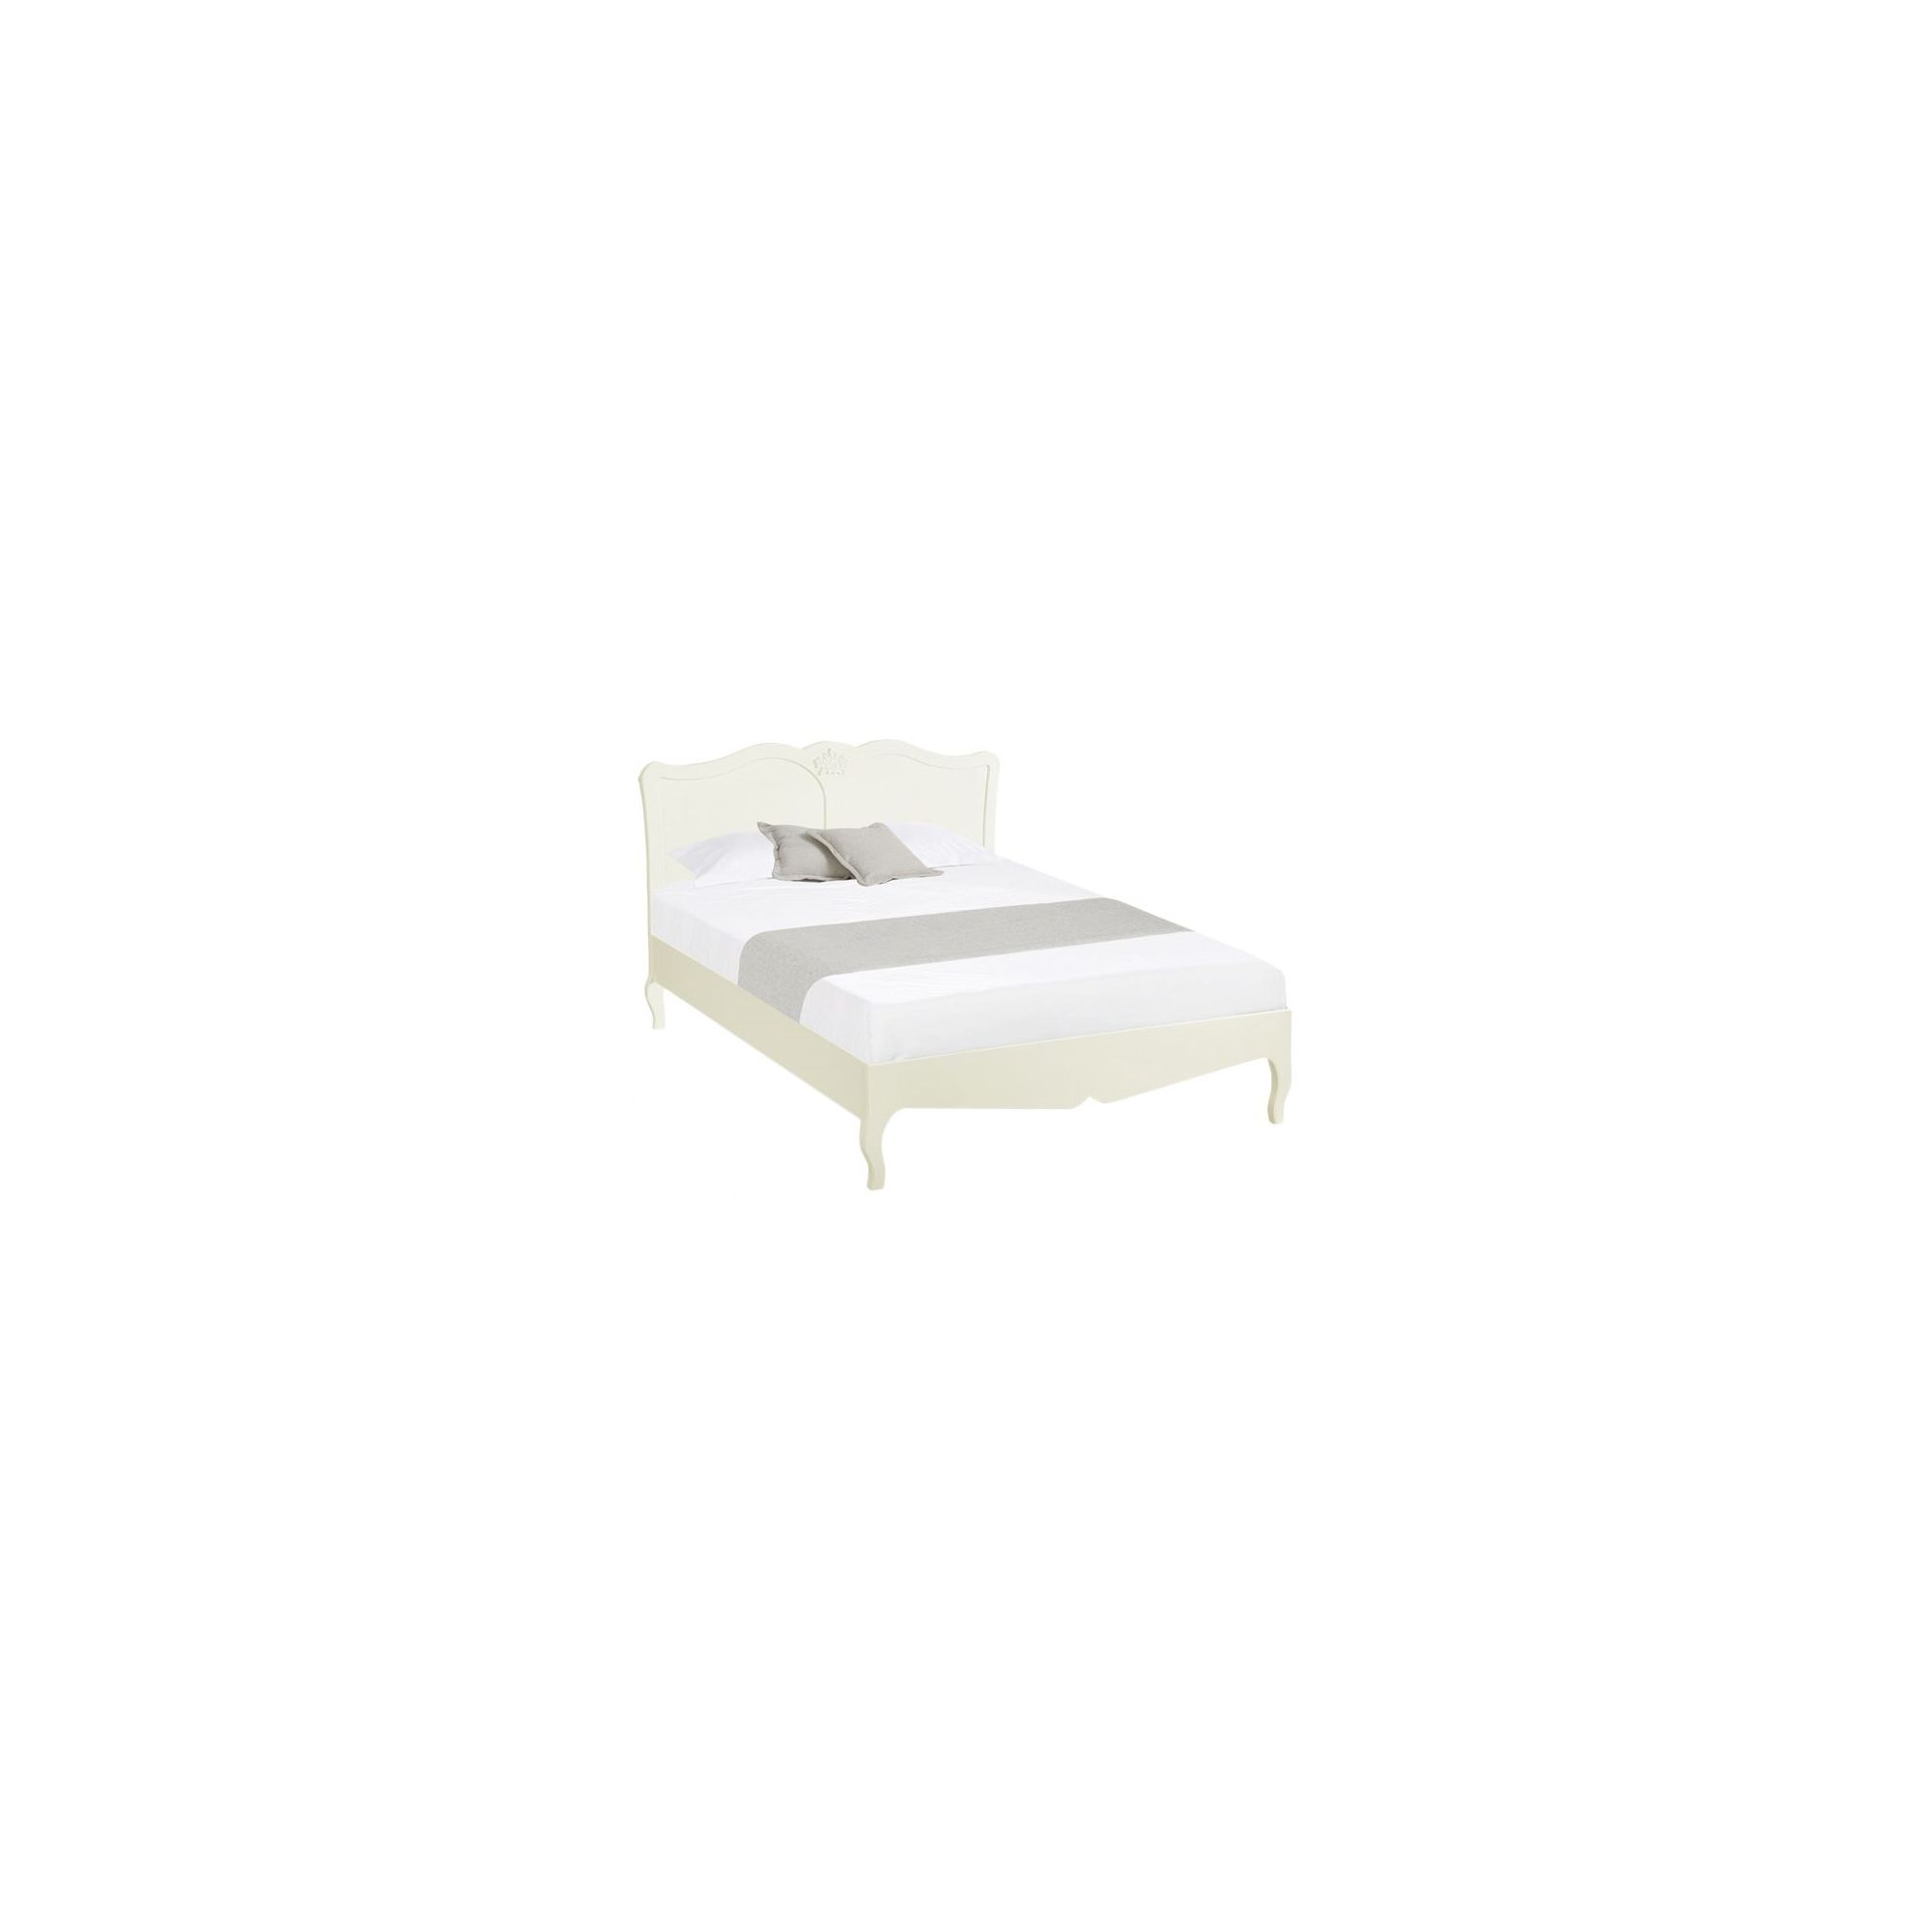 Alterton Furniture Normandy Bed - King at Tesco Direct